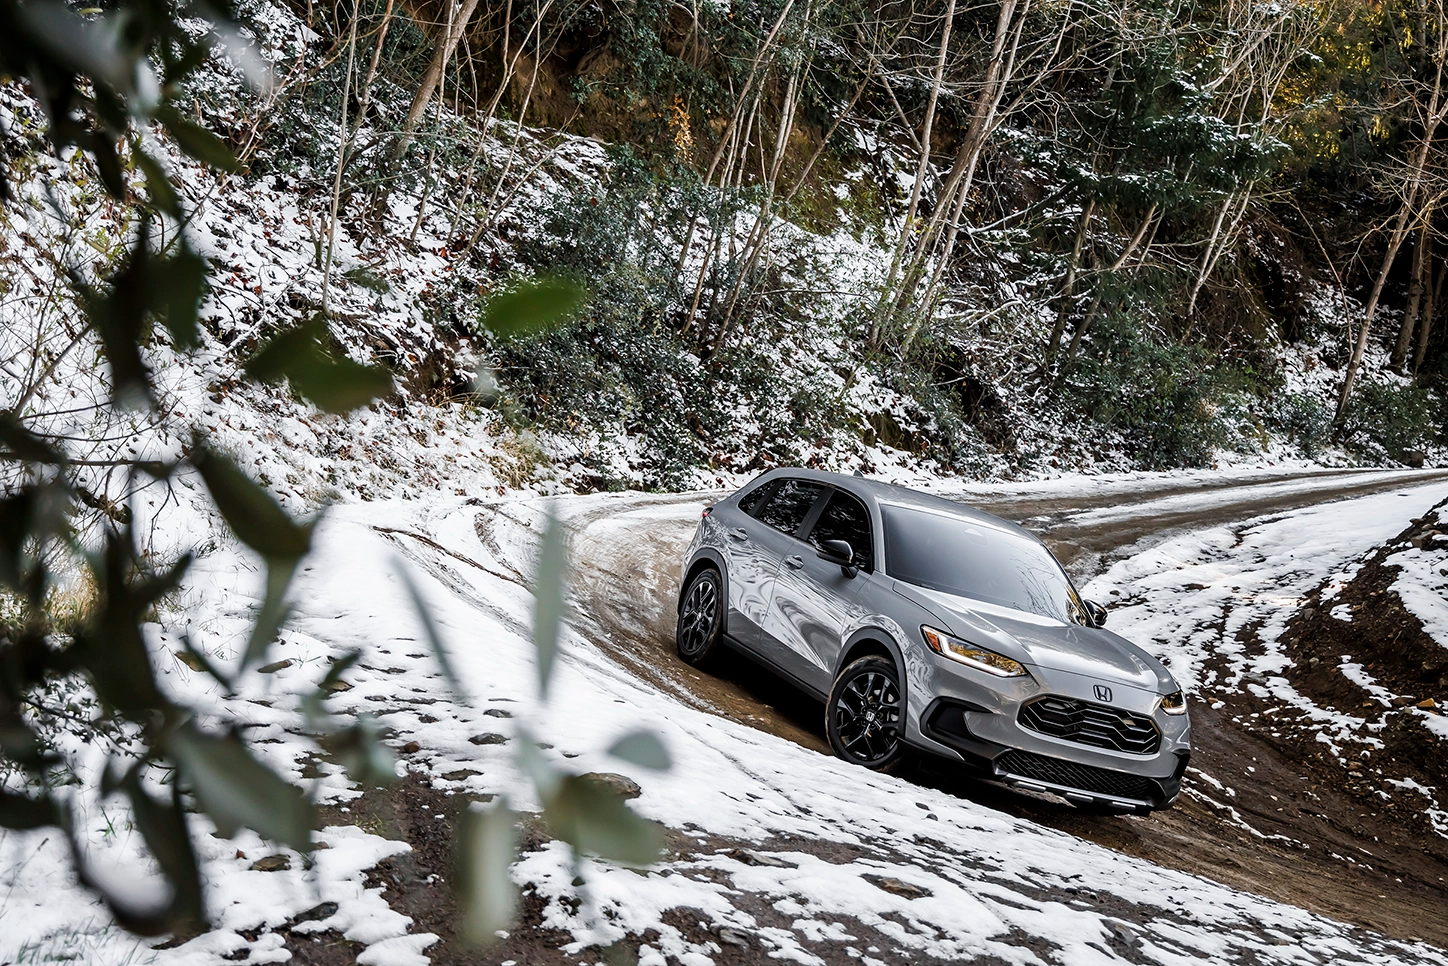 The 2023 HR-V SUV: Agile and Versatile